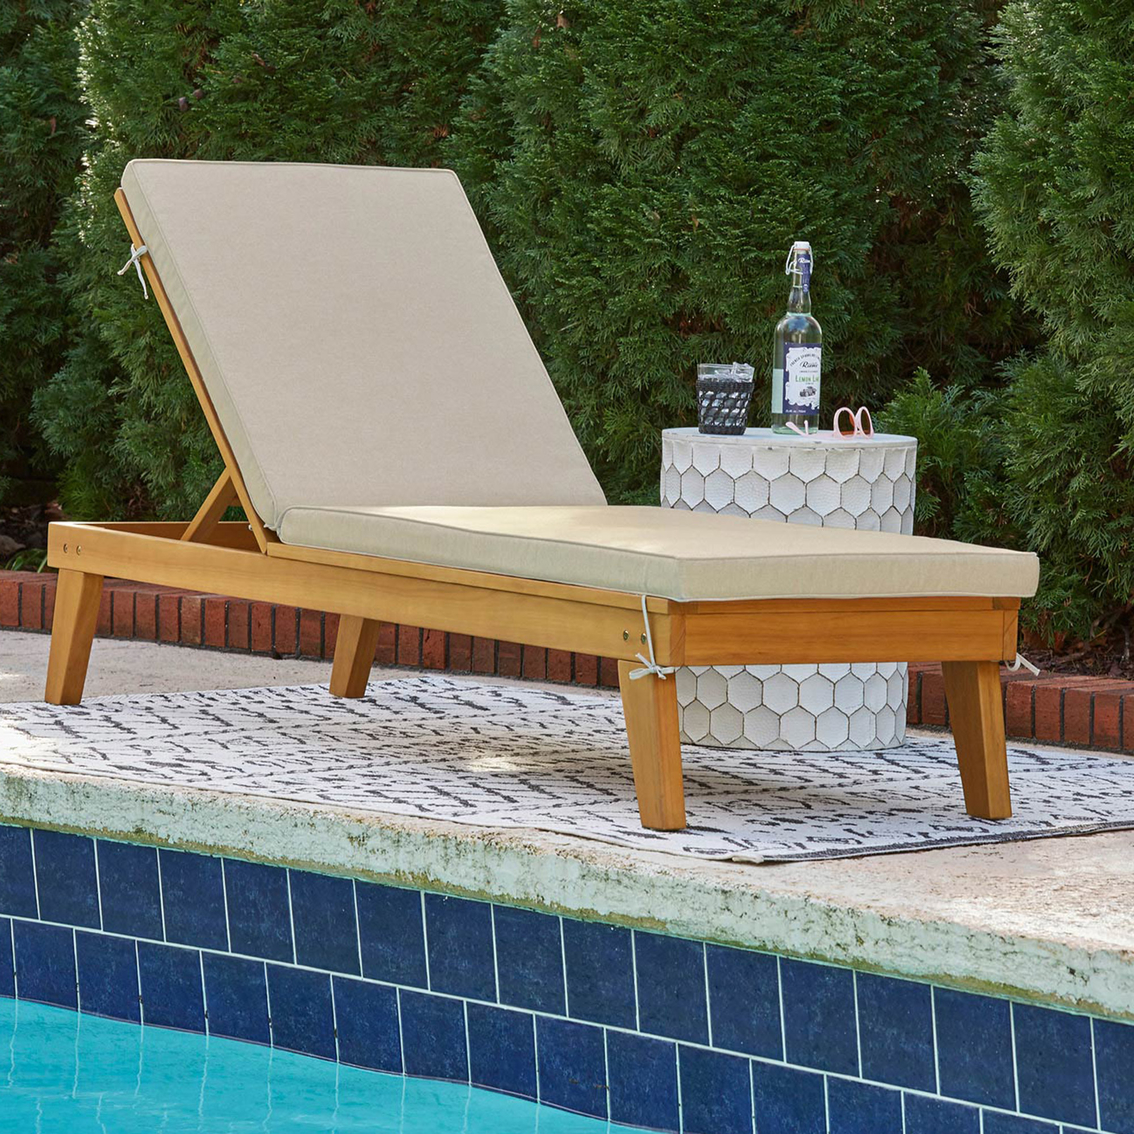 Signature Design by Ashley Byron Bay Outdoor Chaise Lounge with Cushion - Image 5 of 6